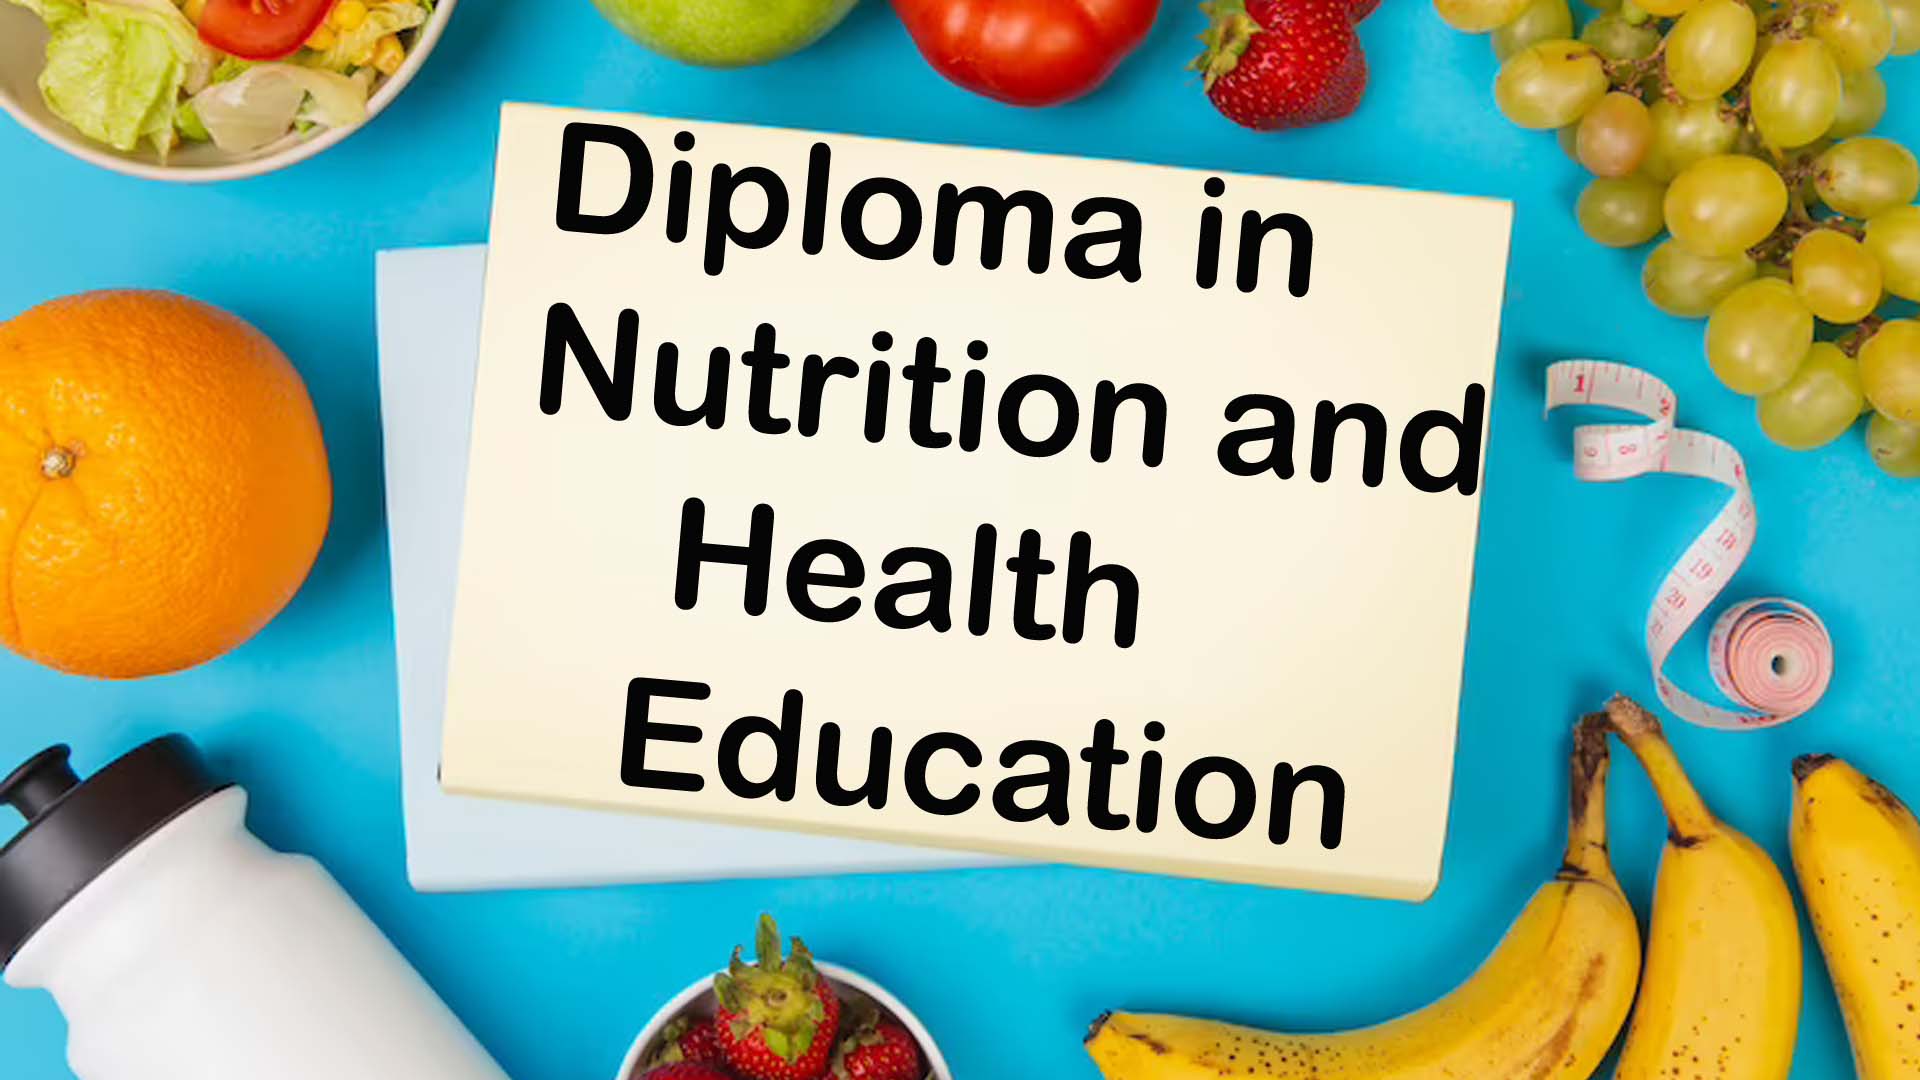 diploma in nutrition and health education ignou syllabus